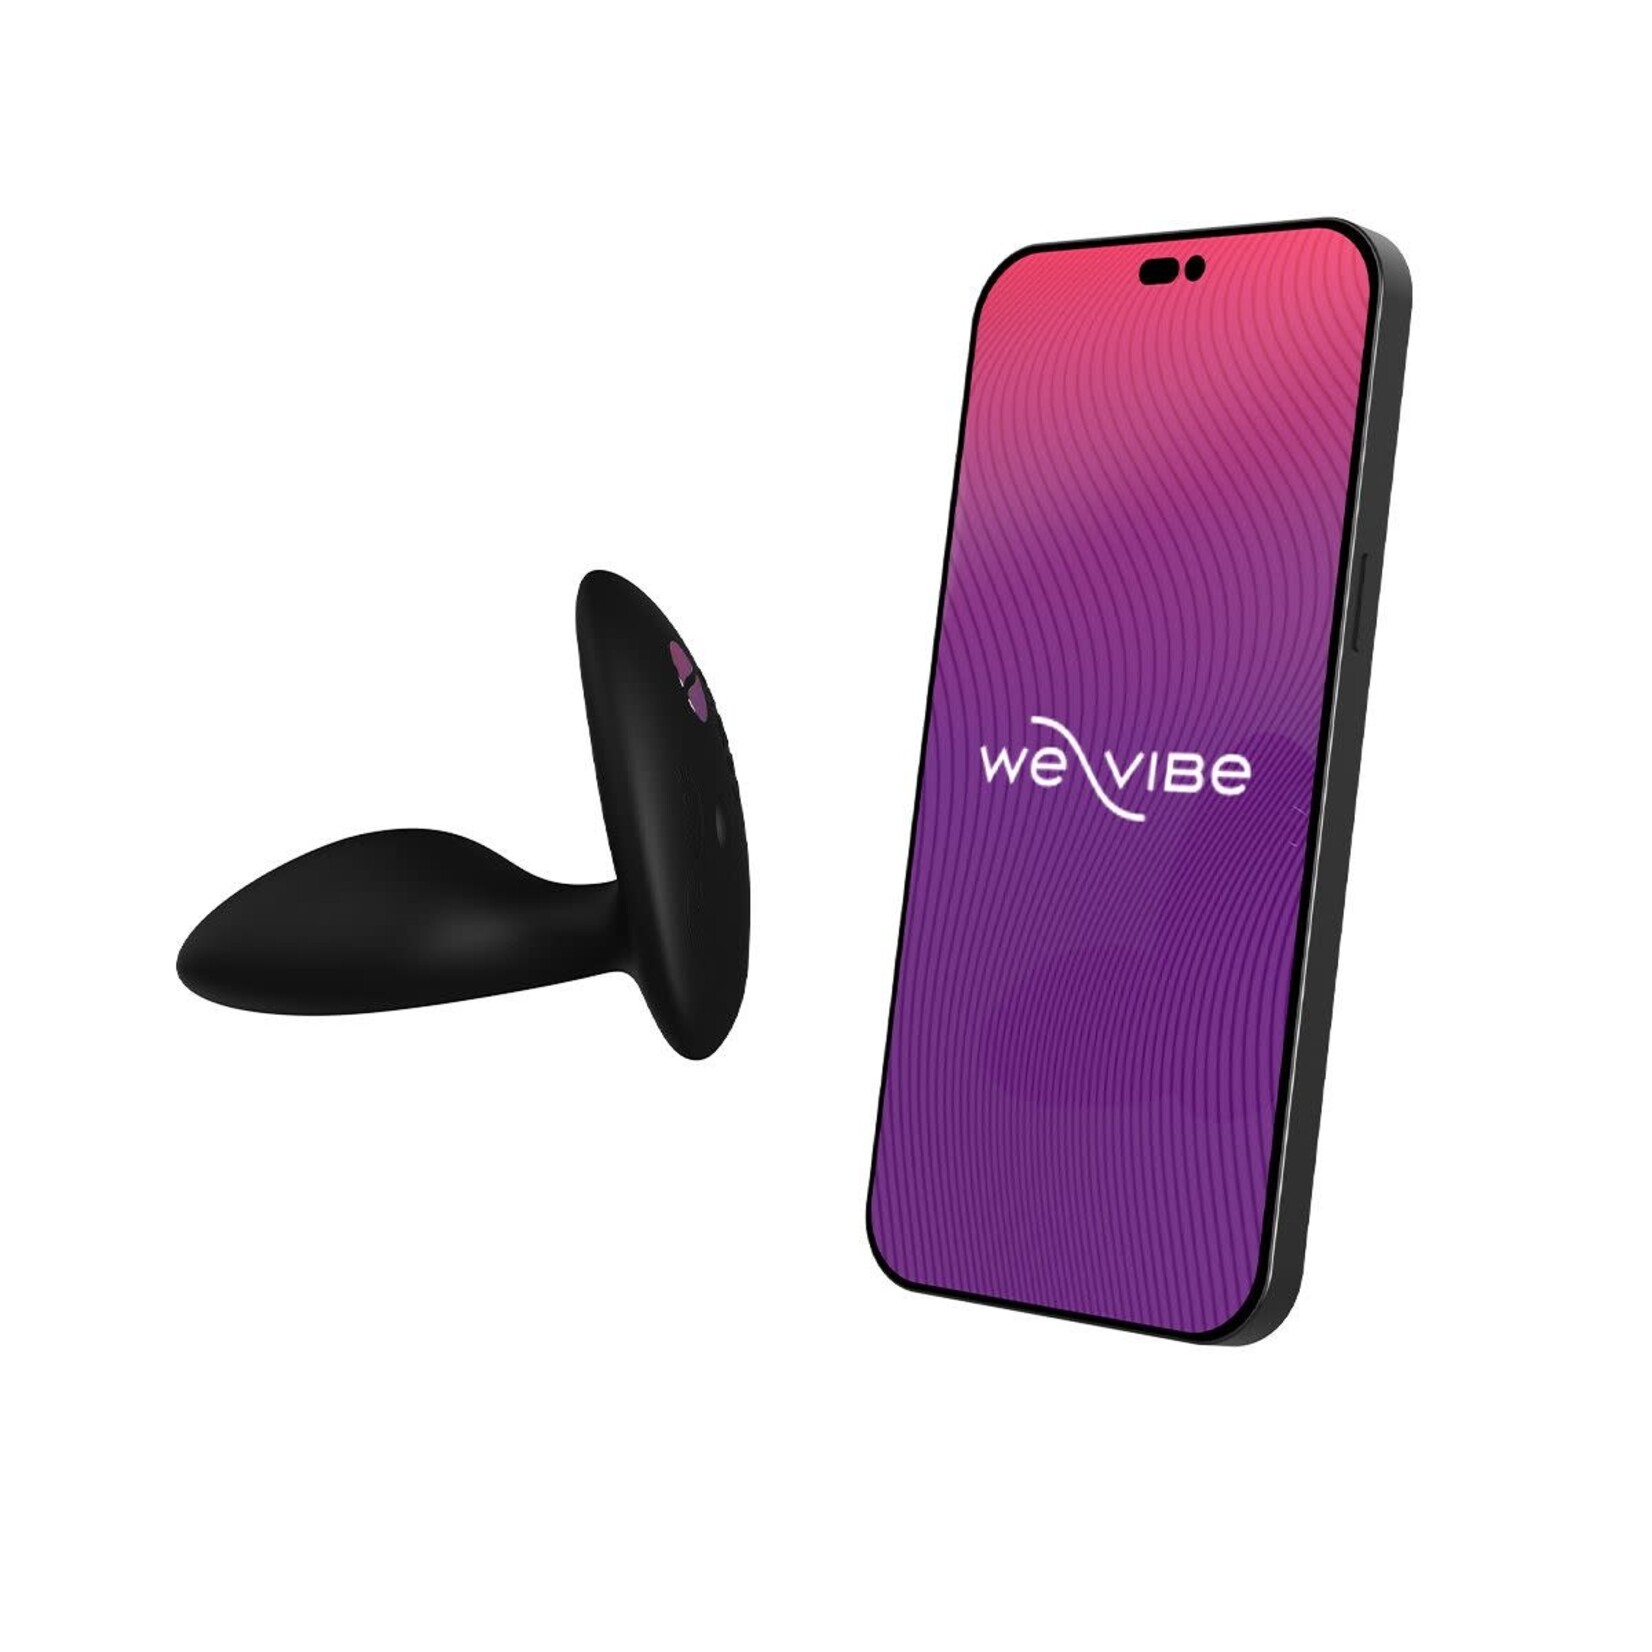 WE-VIBE WE-VIBE - DITTO+ - VIBRATING ANAL PLUG WITH REMOTE - SATIN BLACK